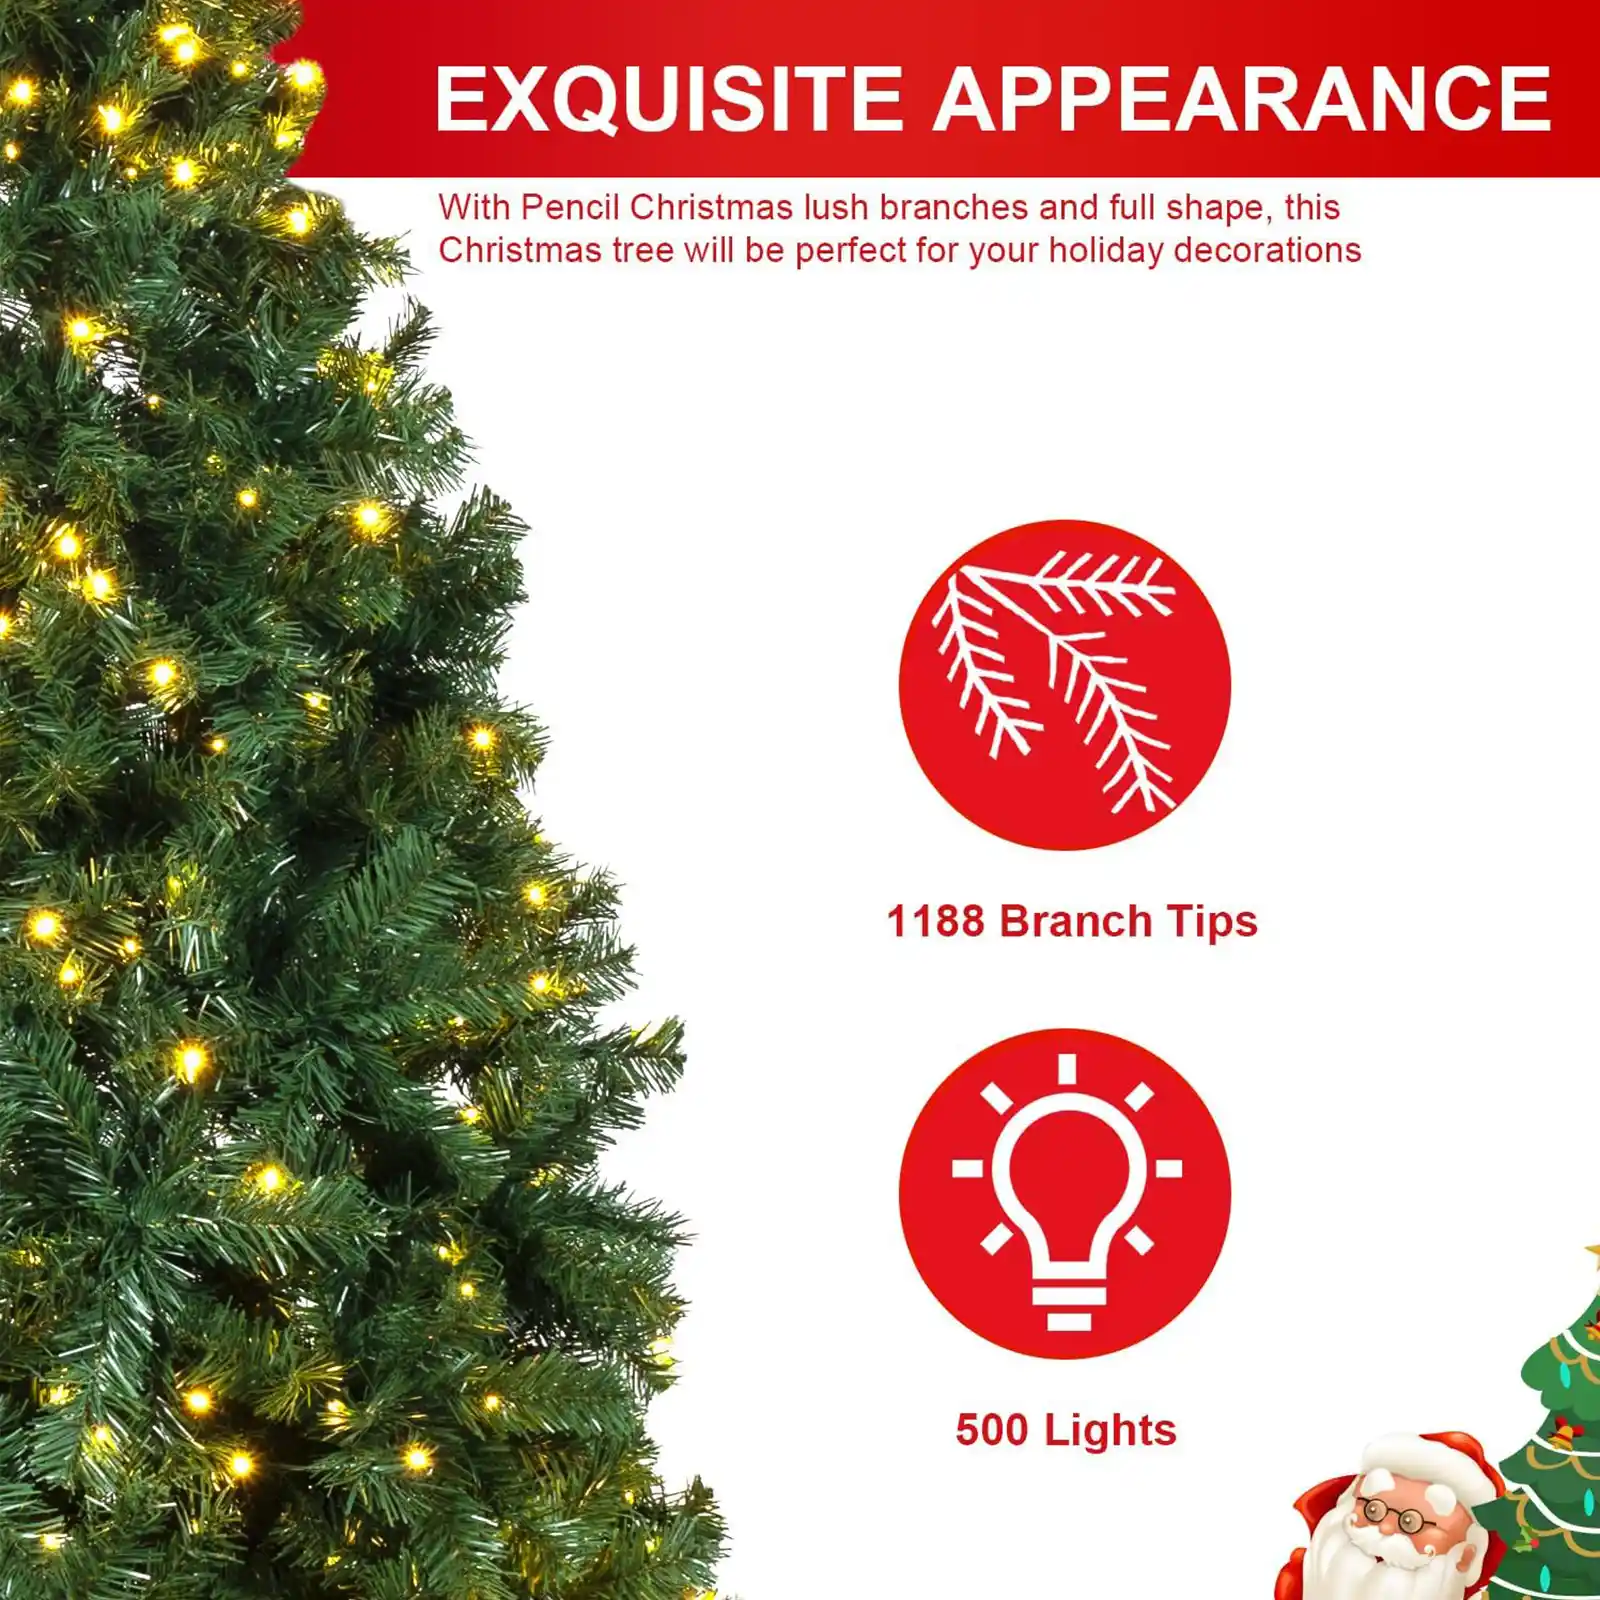 7.5ft Pre-lit Christmas Tree, Spruce Artificial Christmas Tree with Warm White Lights, Xmas Tree with Storage Bag and Metal Stand for Indoor and Outdoor Holiday Decoration